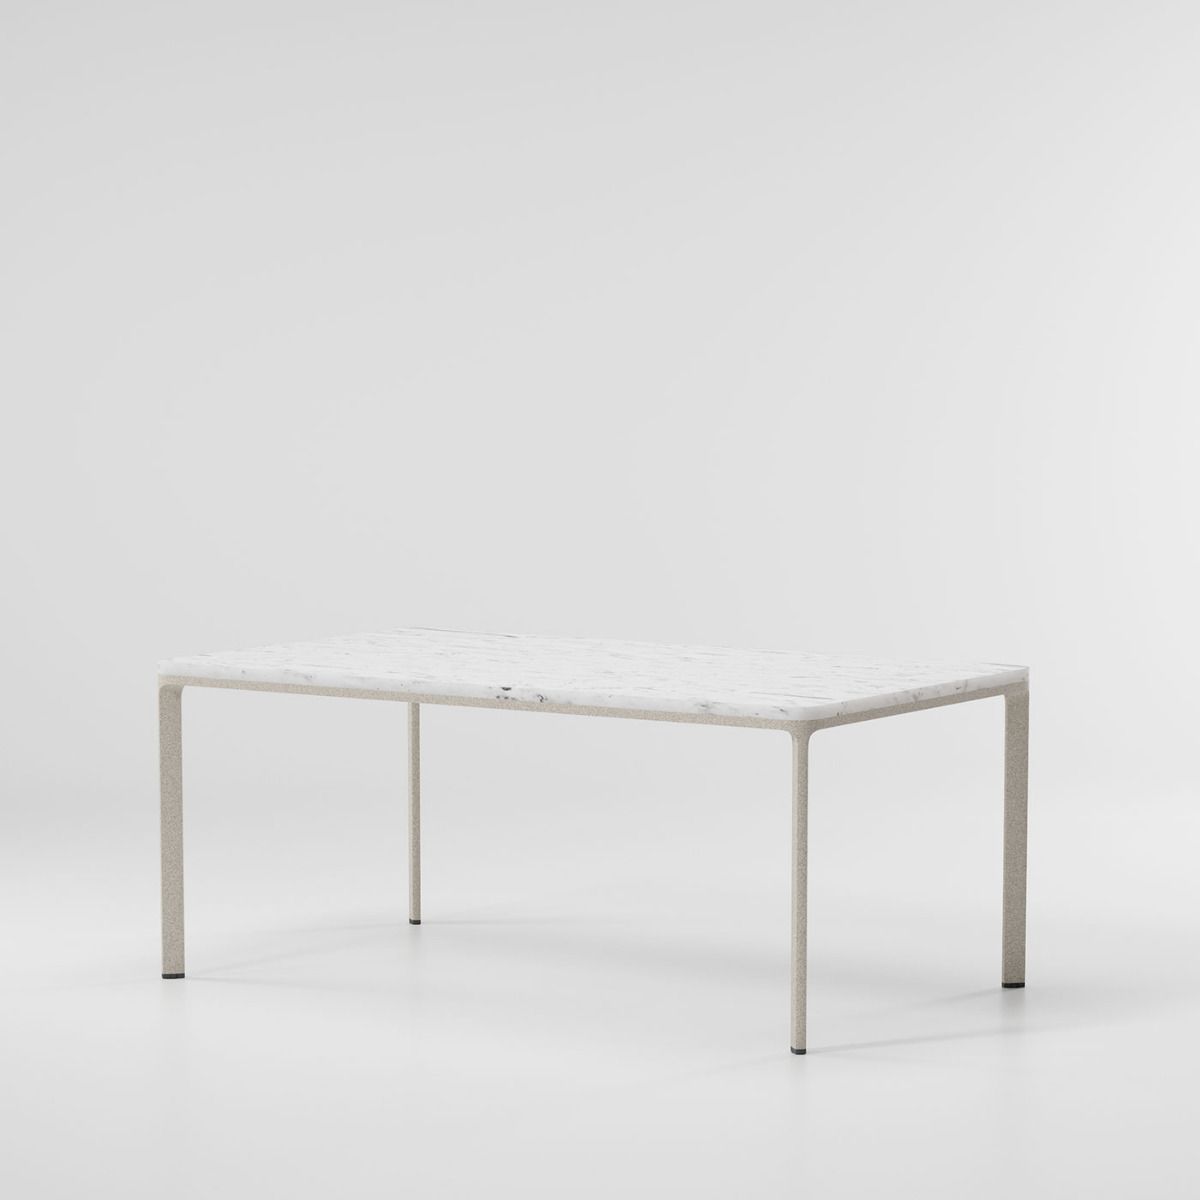 Kettal Park Life Low Dining Table 160x94 - 6 Guests